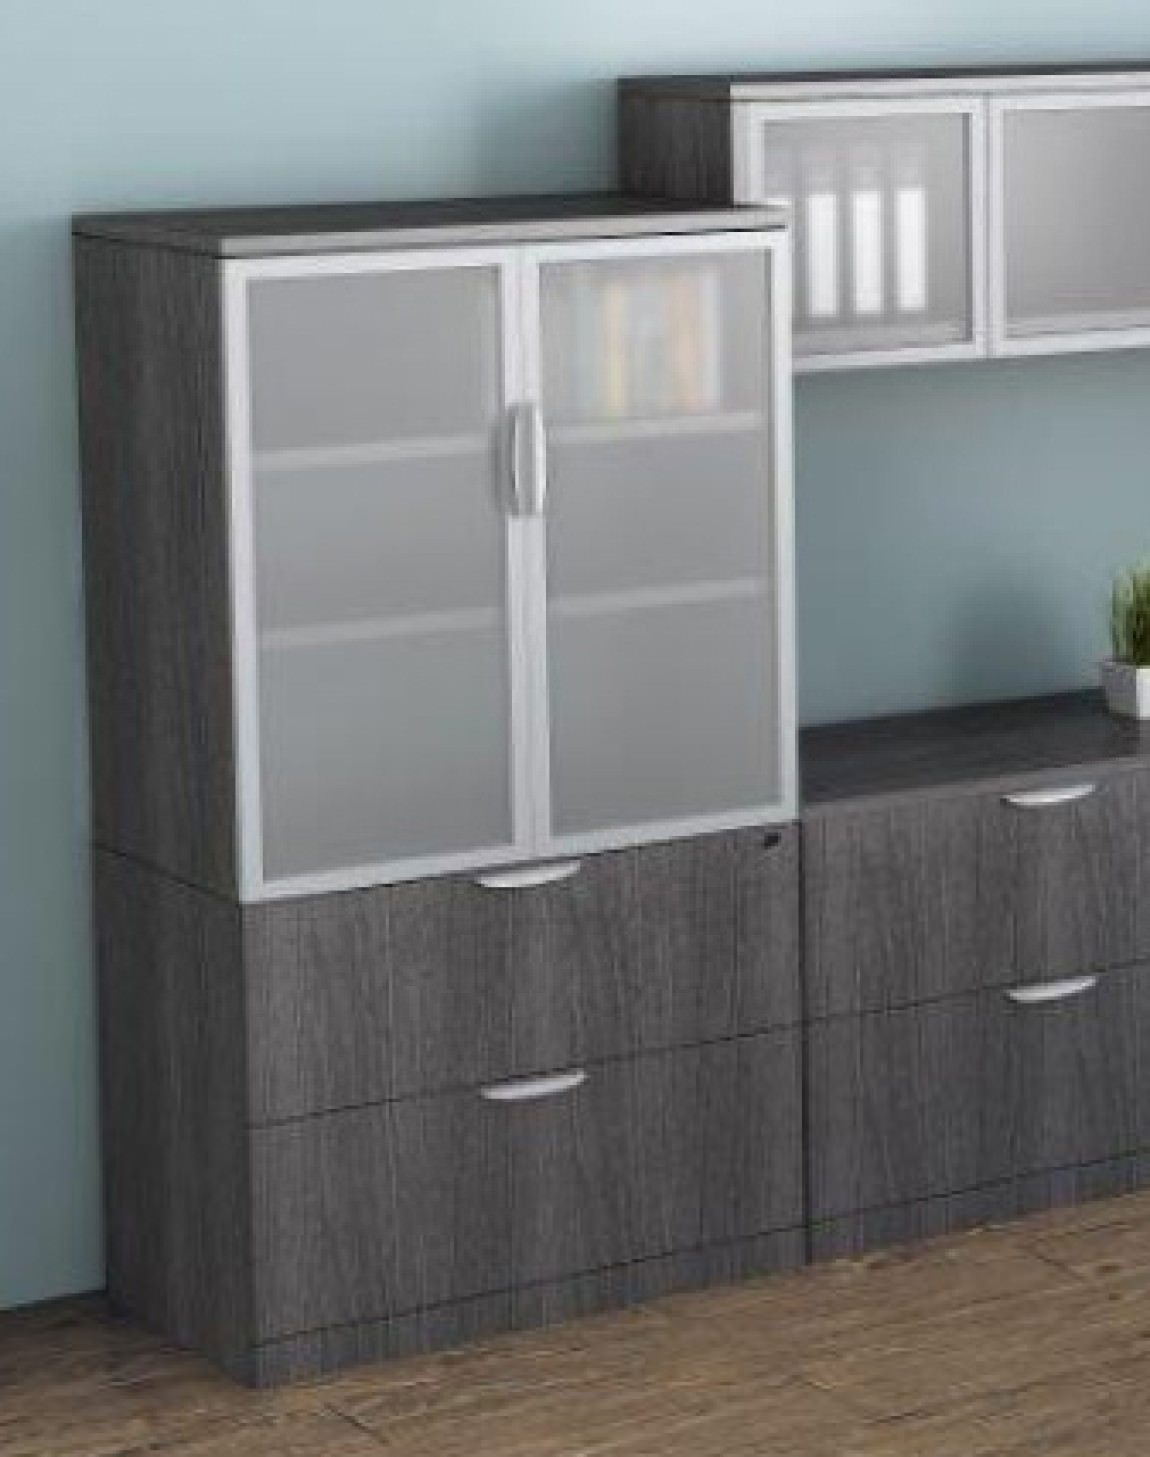 Lateral File Cabinet Credenza with Storage - Glass Doors